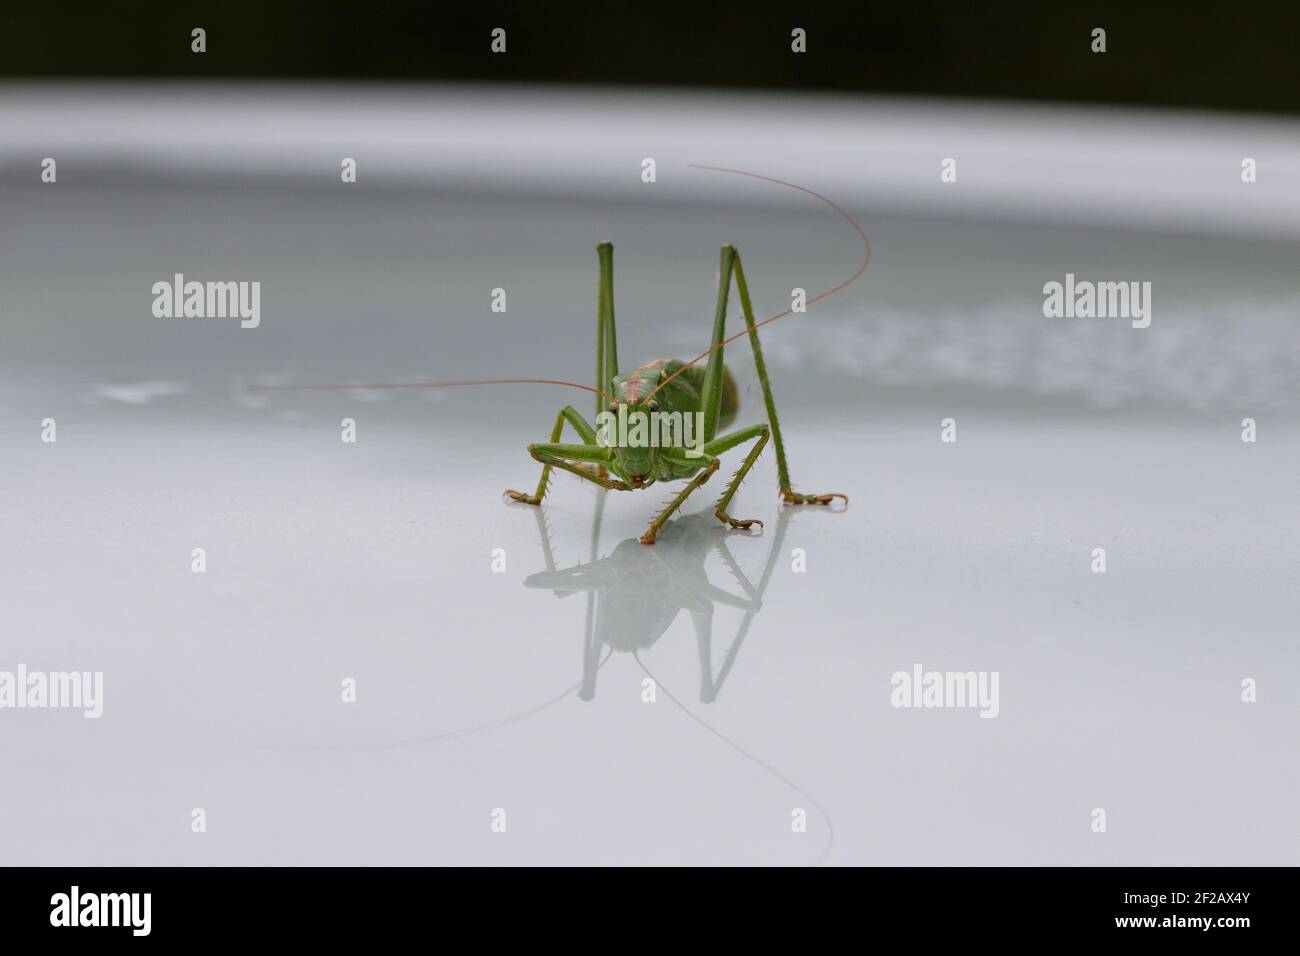 Green giant Grasshopper on silver reflective surface on a windy day, close details, rectangular Stock Photo